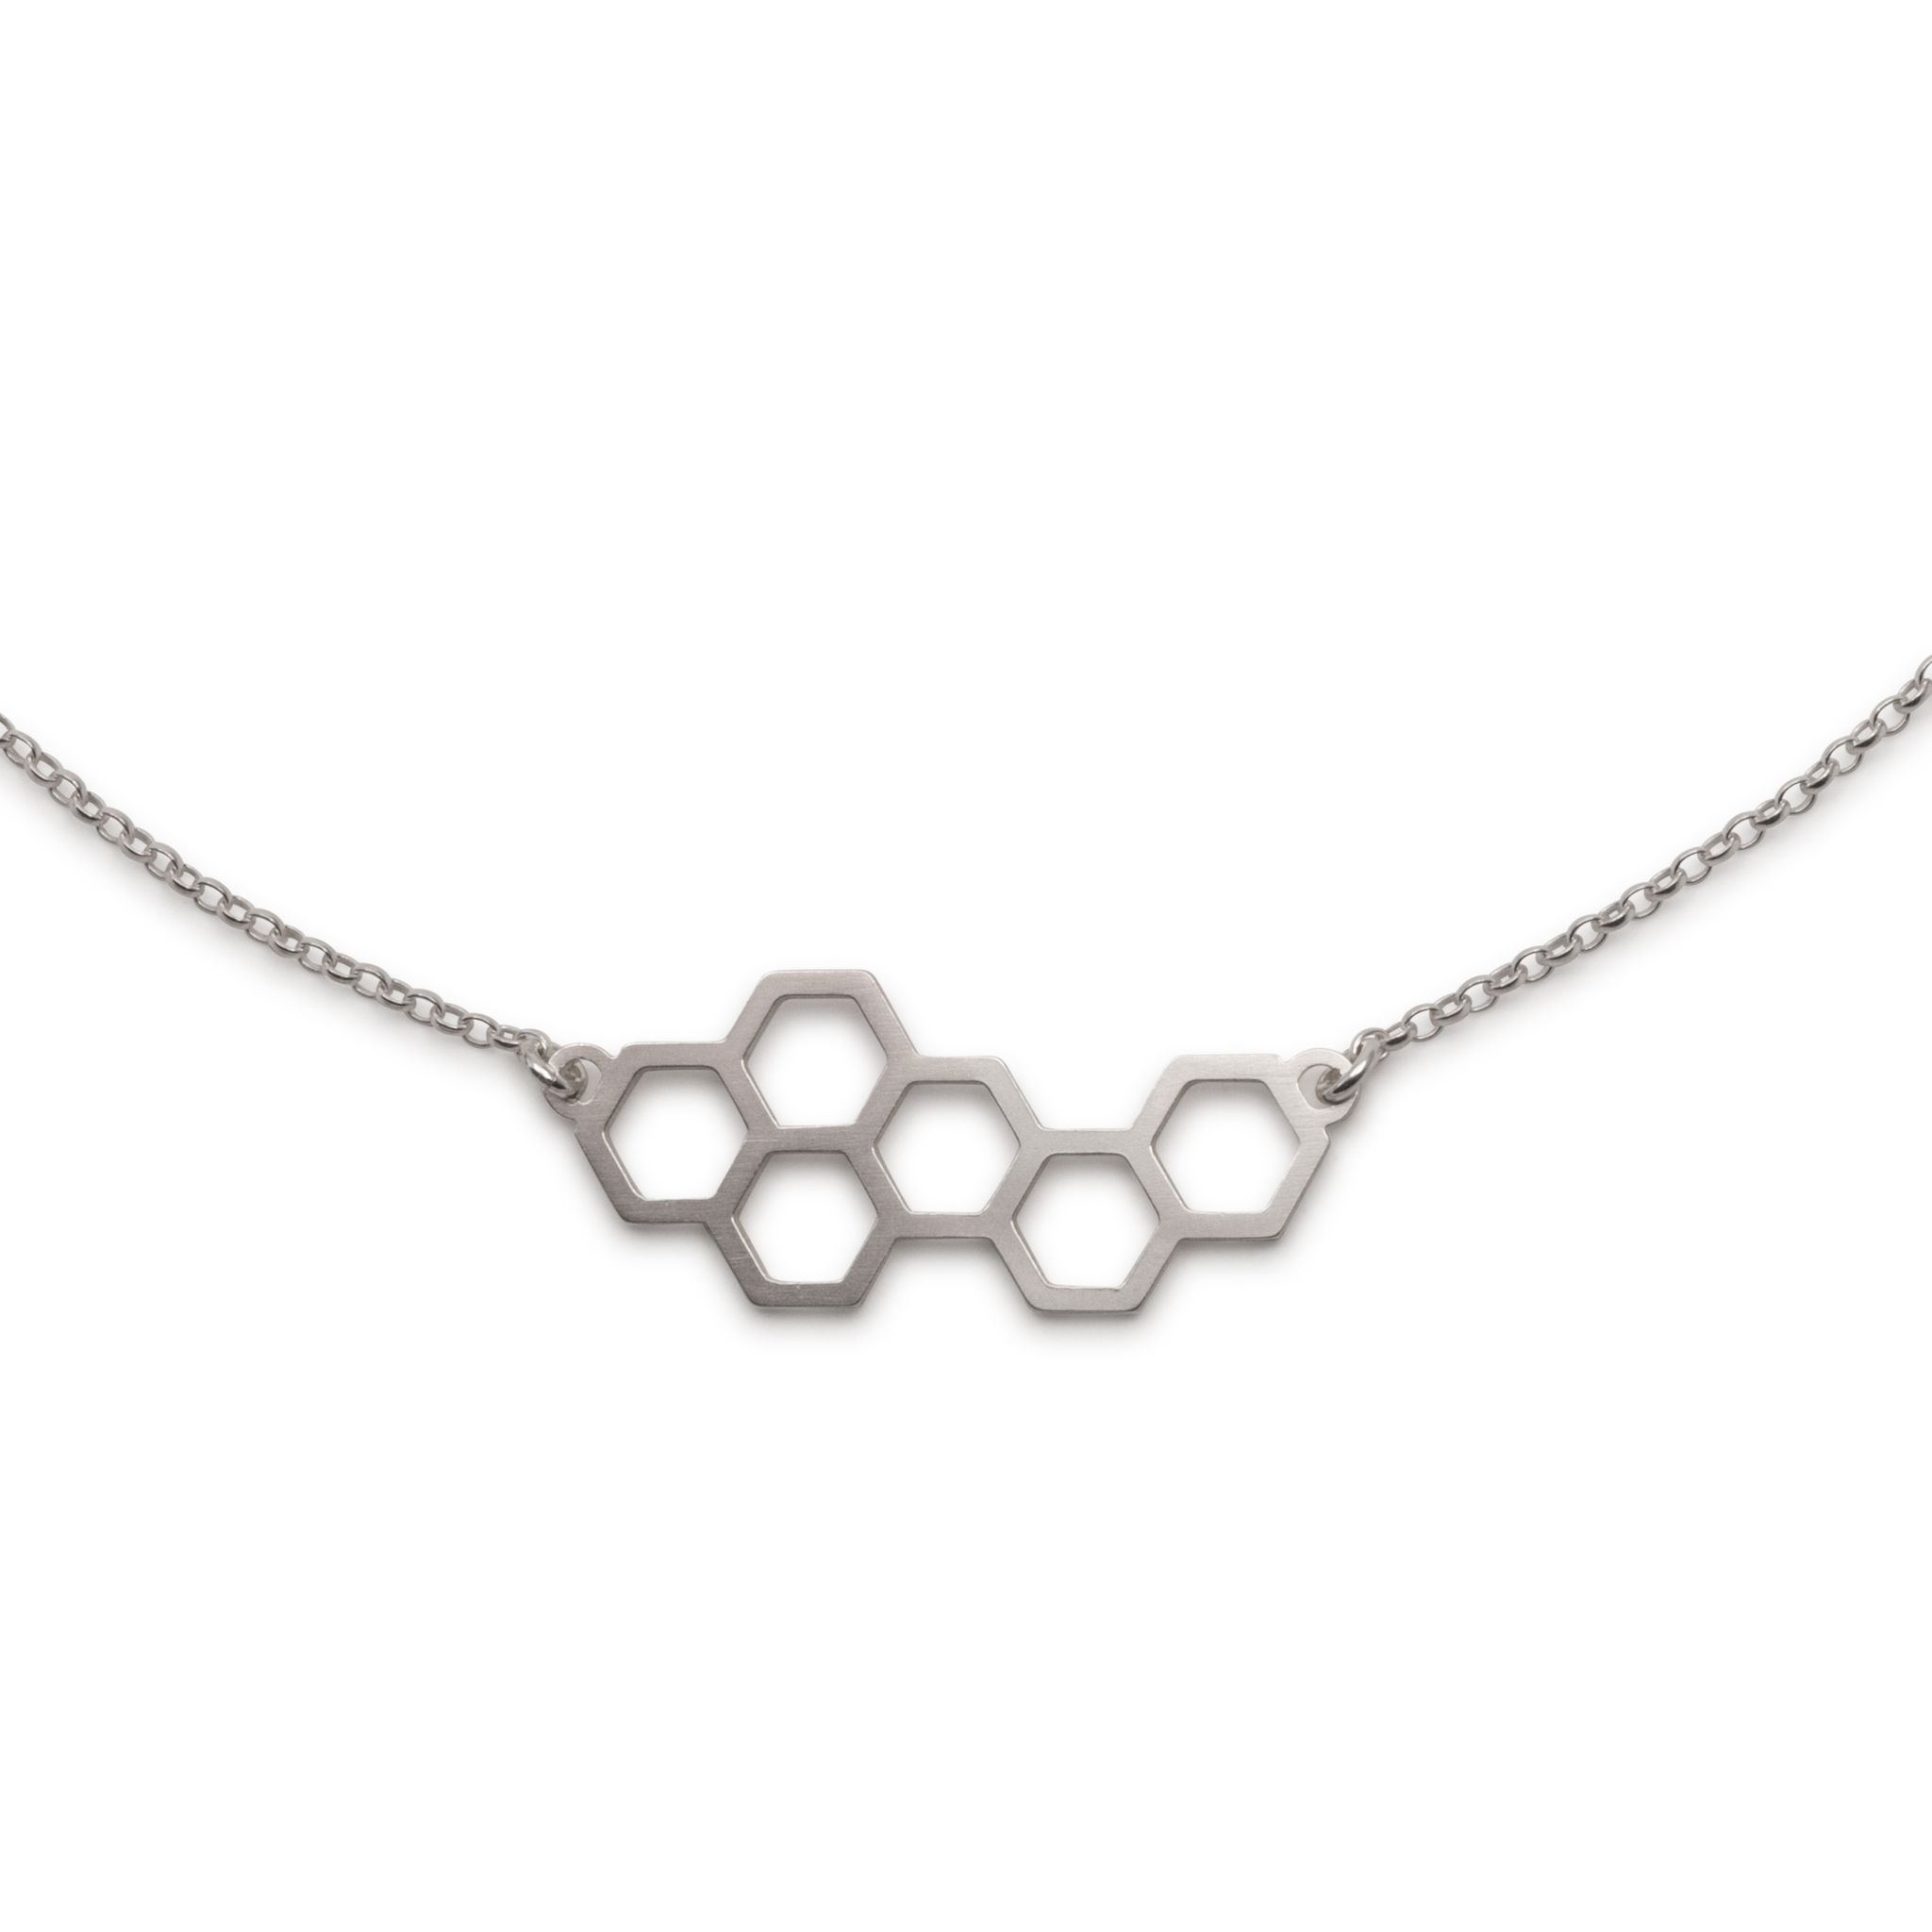 Honey Necklace Short Recycled Silver